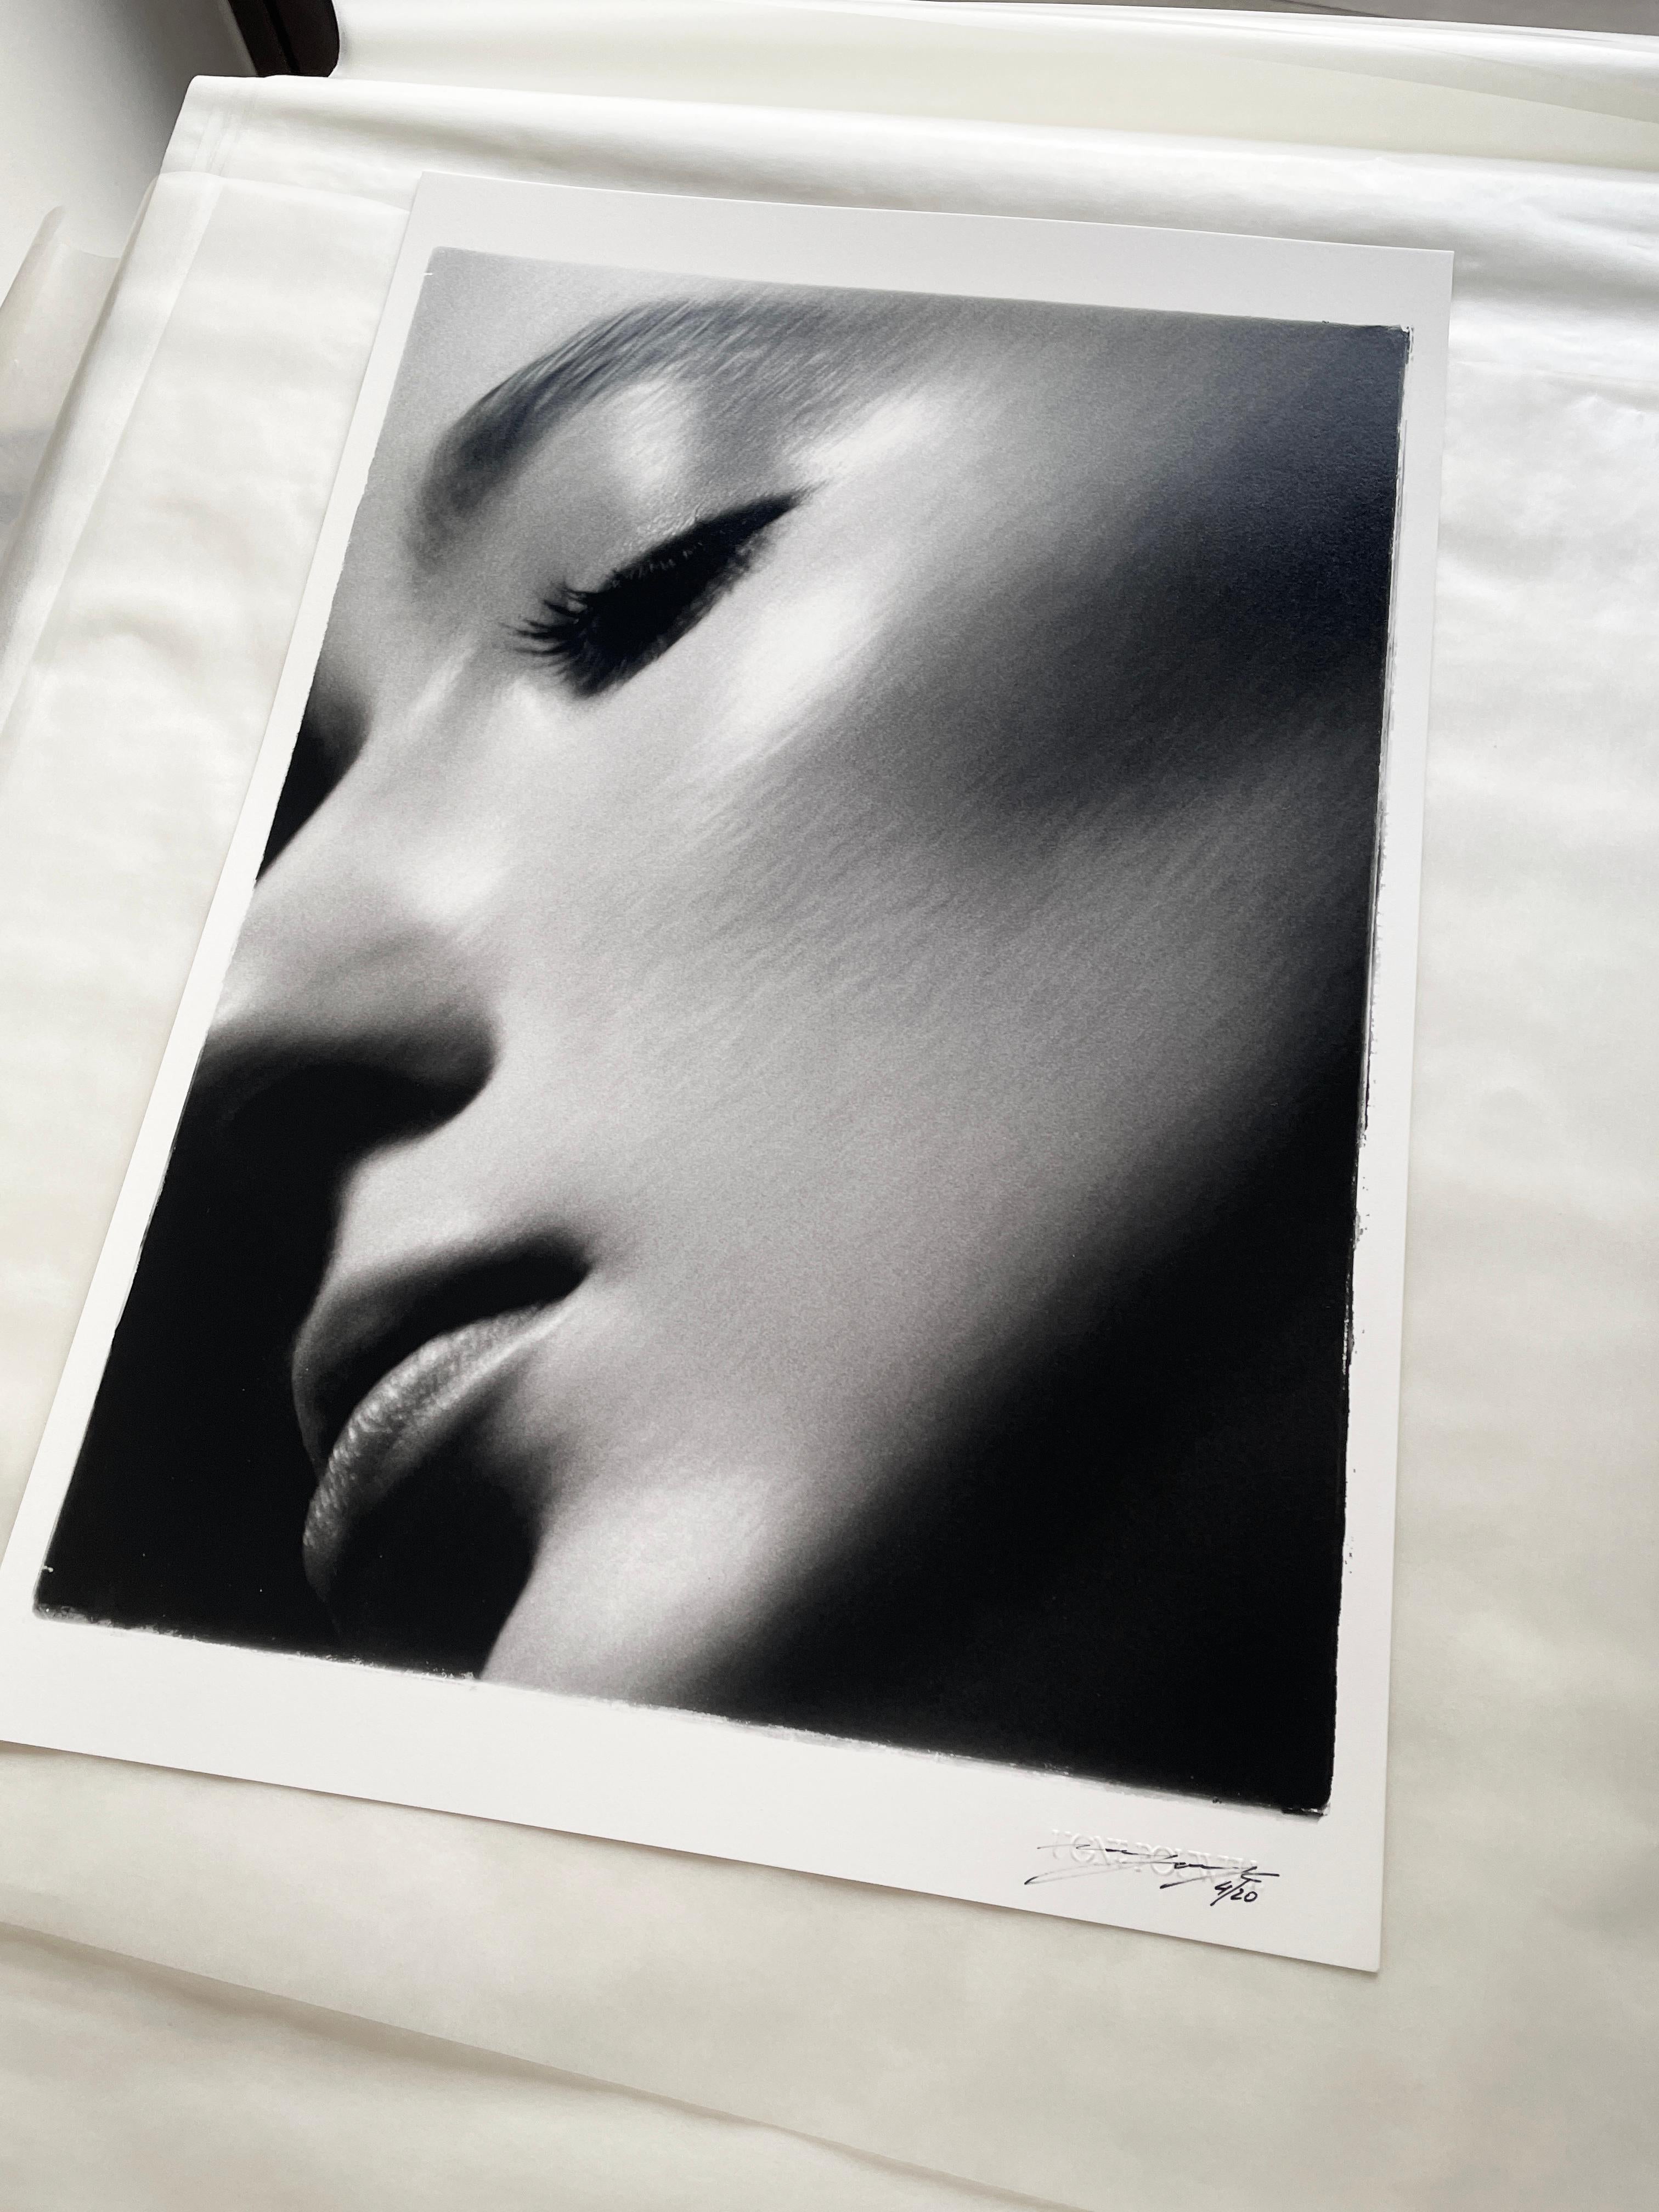 Beauty - black and white close-up female portrait, limited edition of 20 - Photograph by Ugne Pouwell